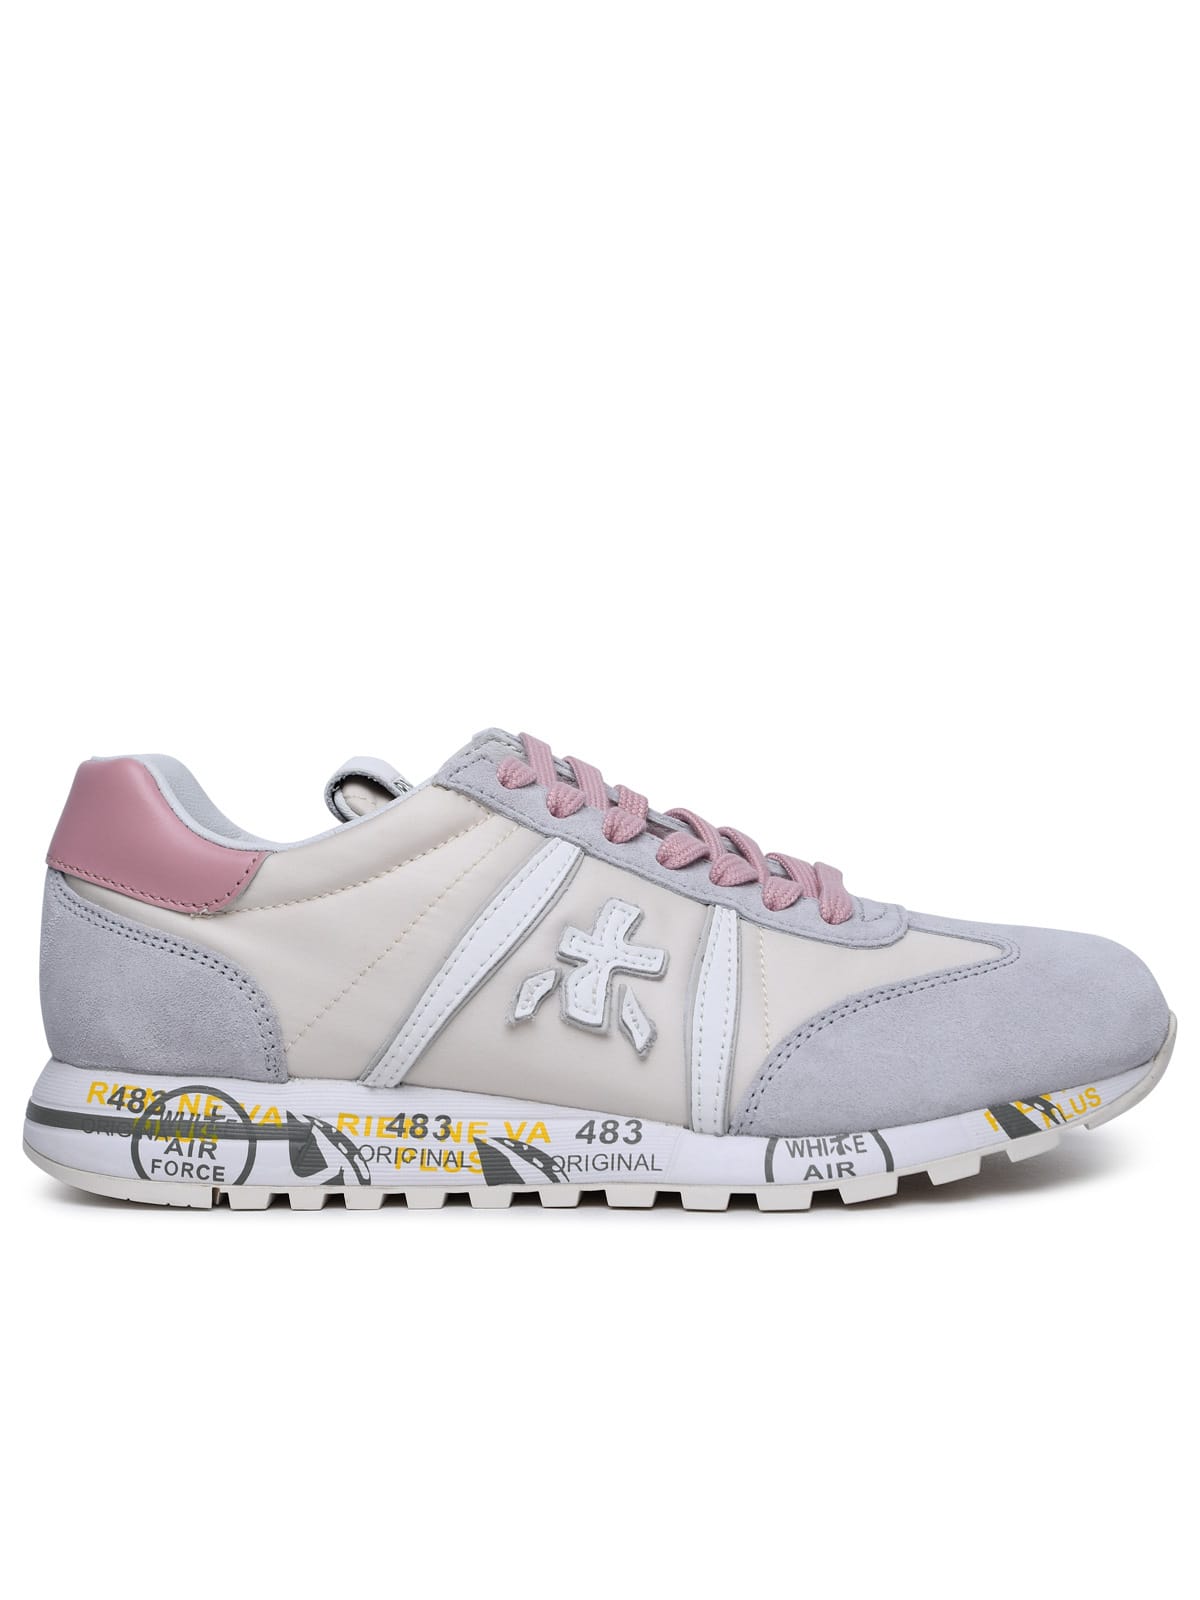 lucyd Multicolor Leather And Nylon Sneakers